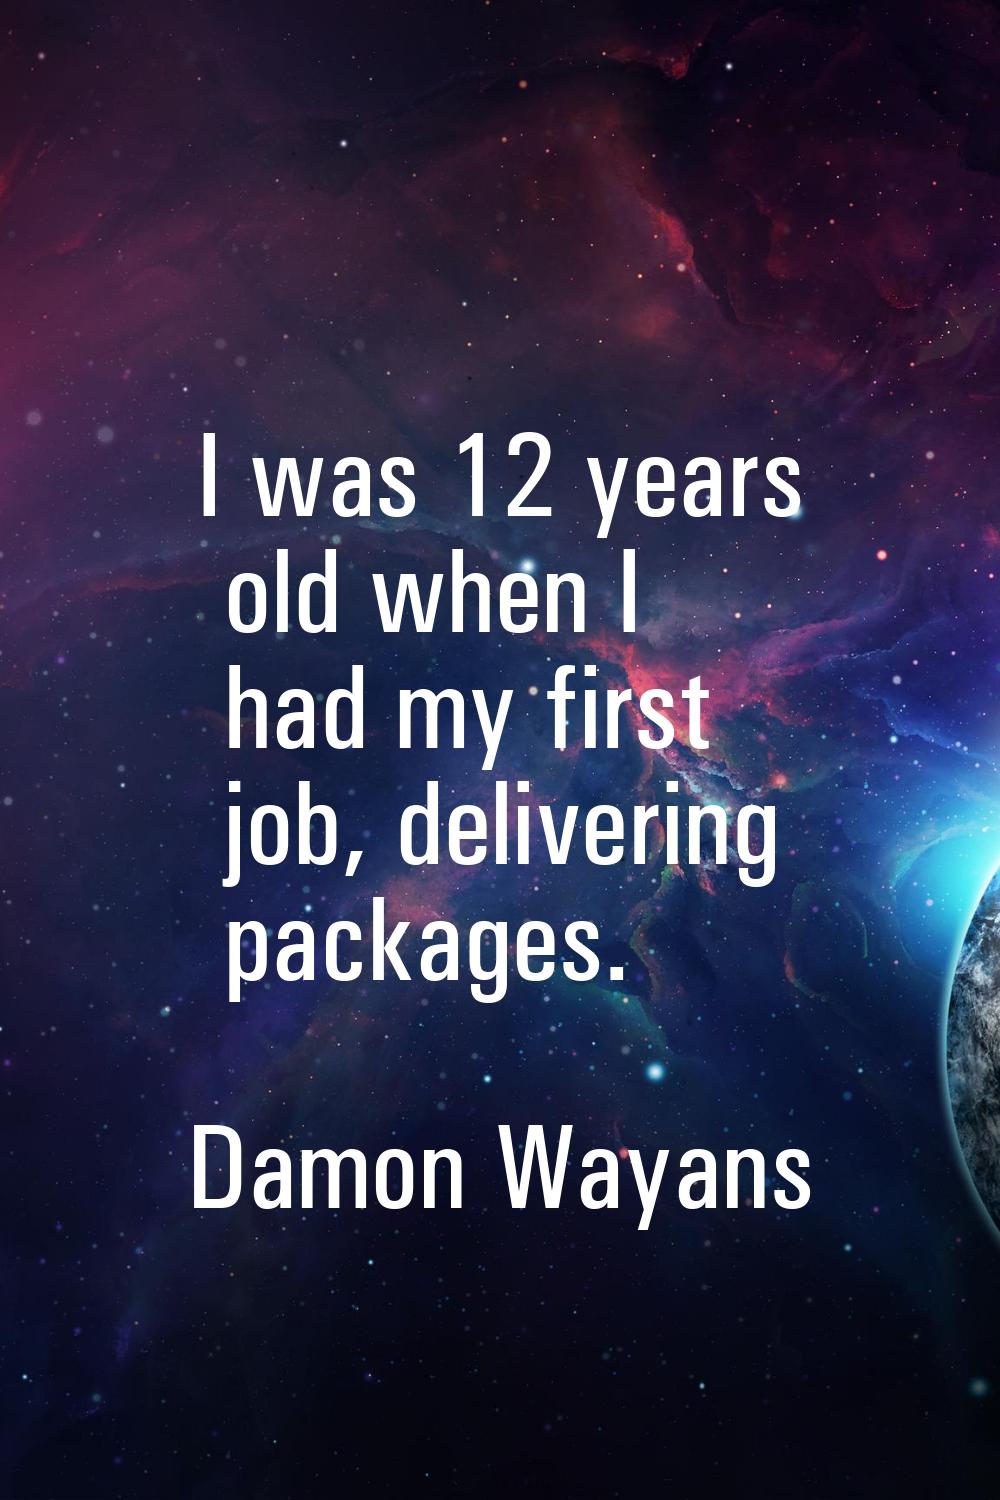 I was 12 years old when I had my first job, delivering packages.